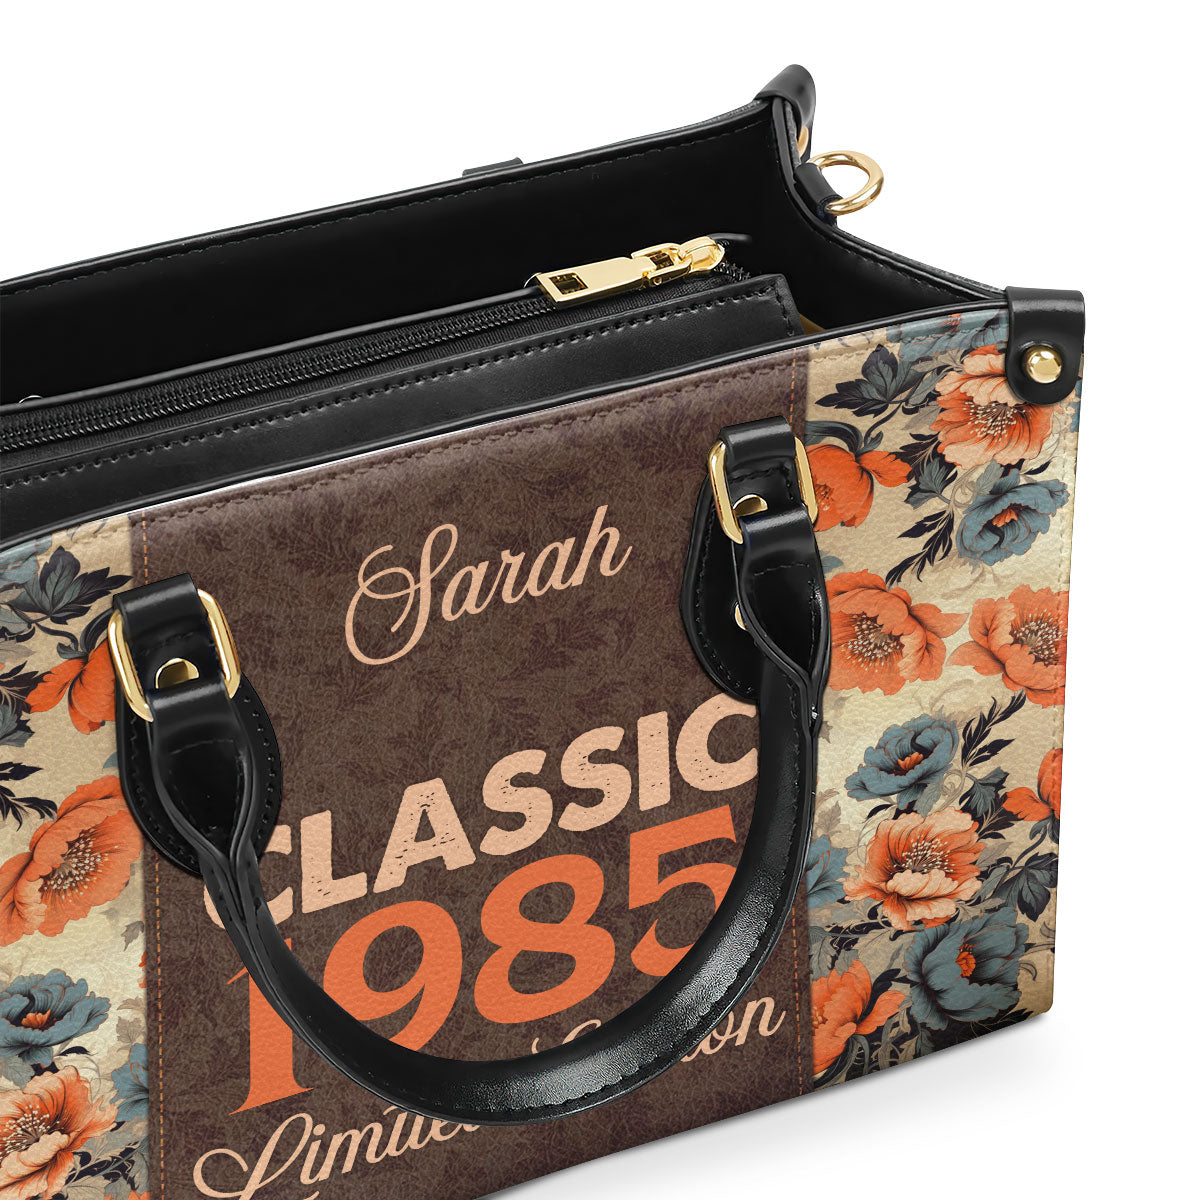 Classic Limited Edition - Personalized Leather Handbag MS-H99